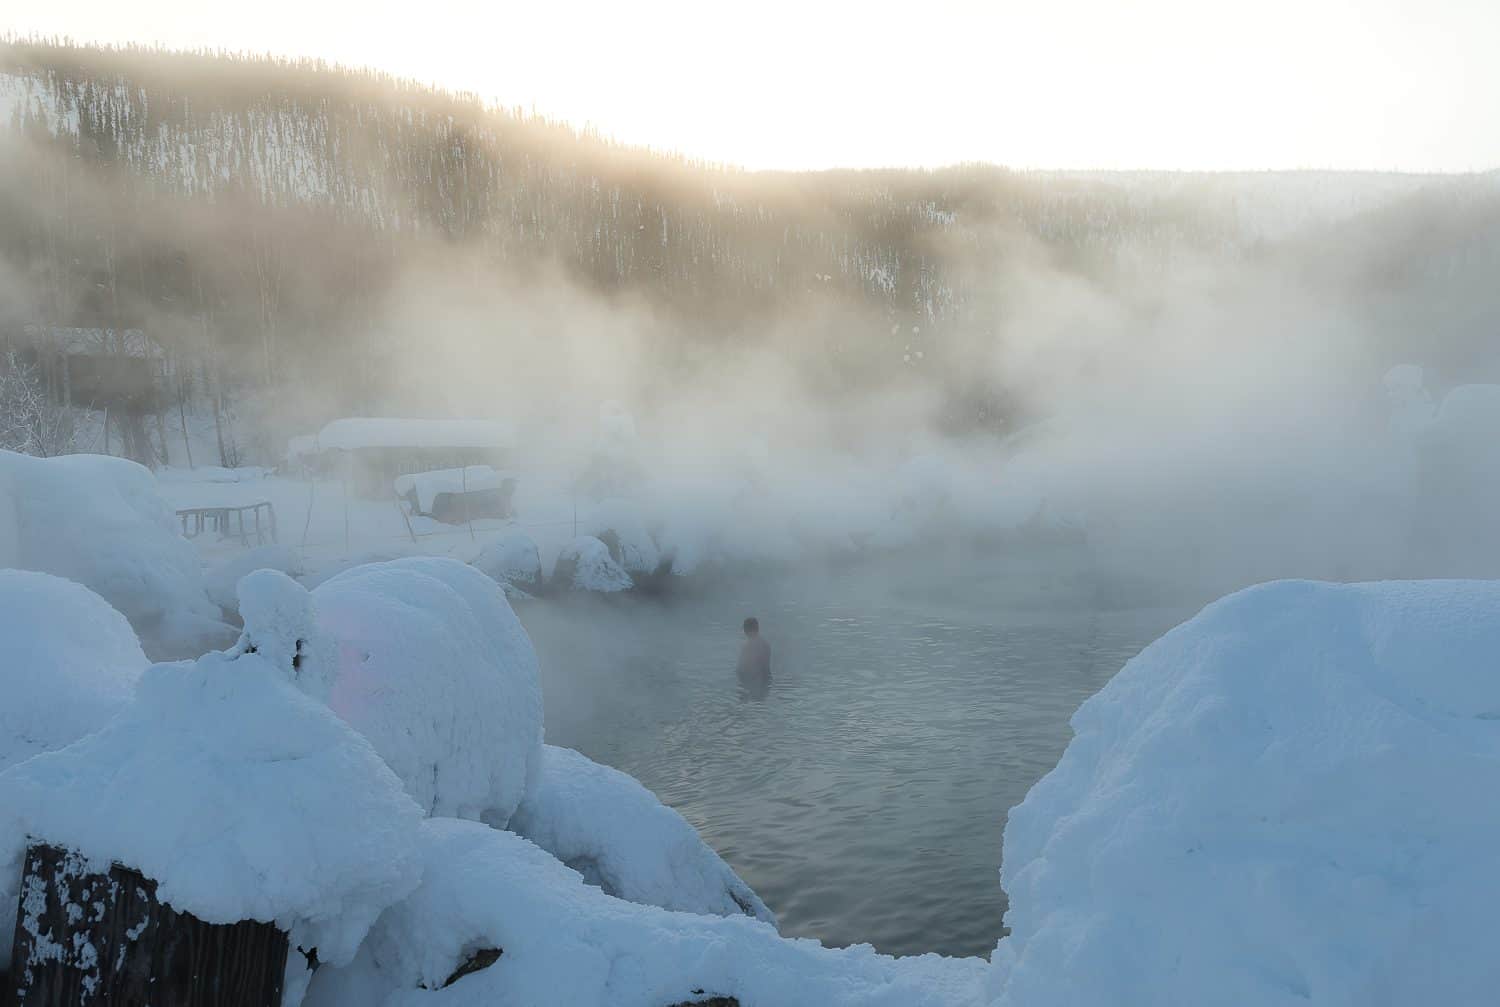 Chena Hot Spring on the top of mountain during winter in Alaska, USA